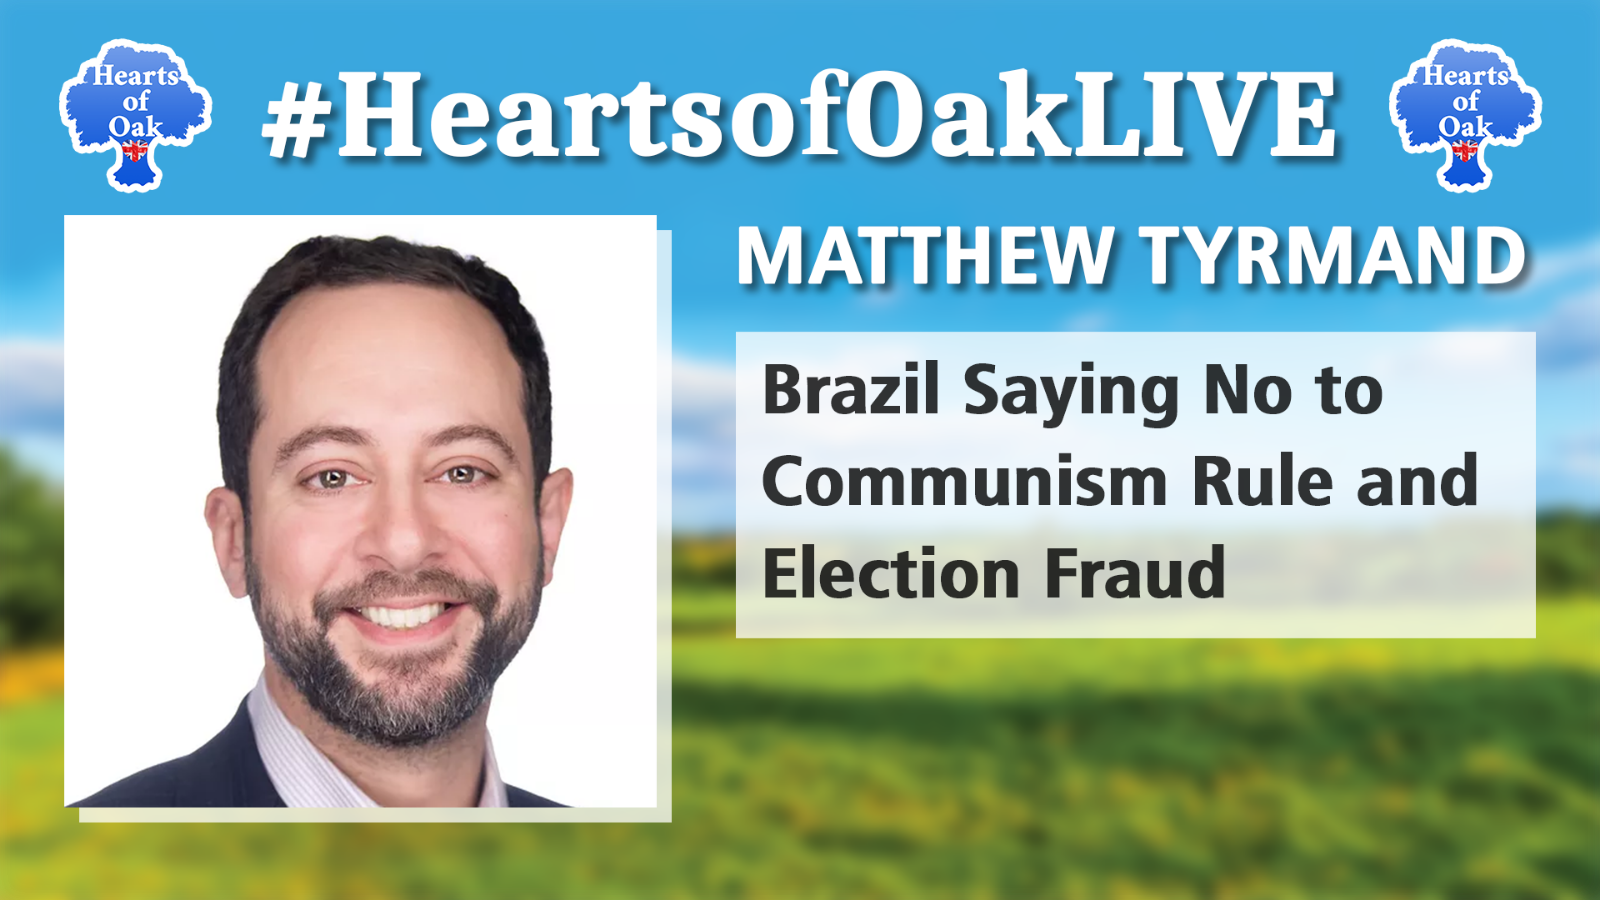 Matthew Tyrmand - Brazil Saying No to Communism Rule and Election Fraud